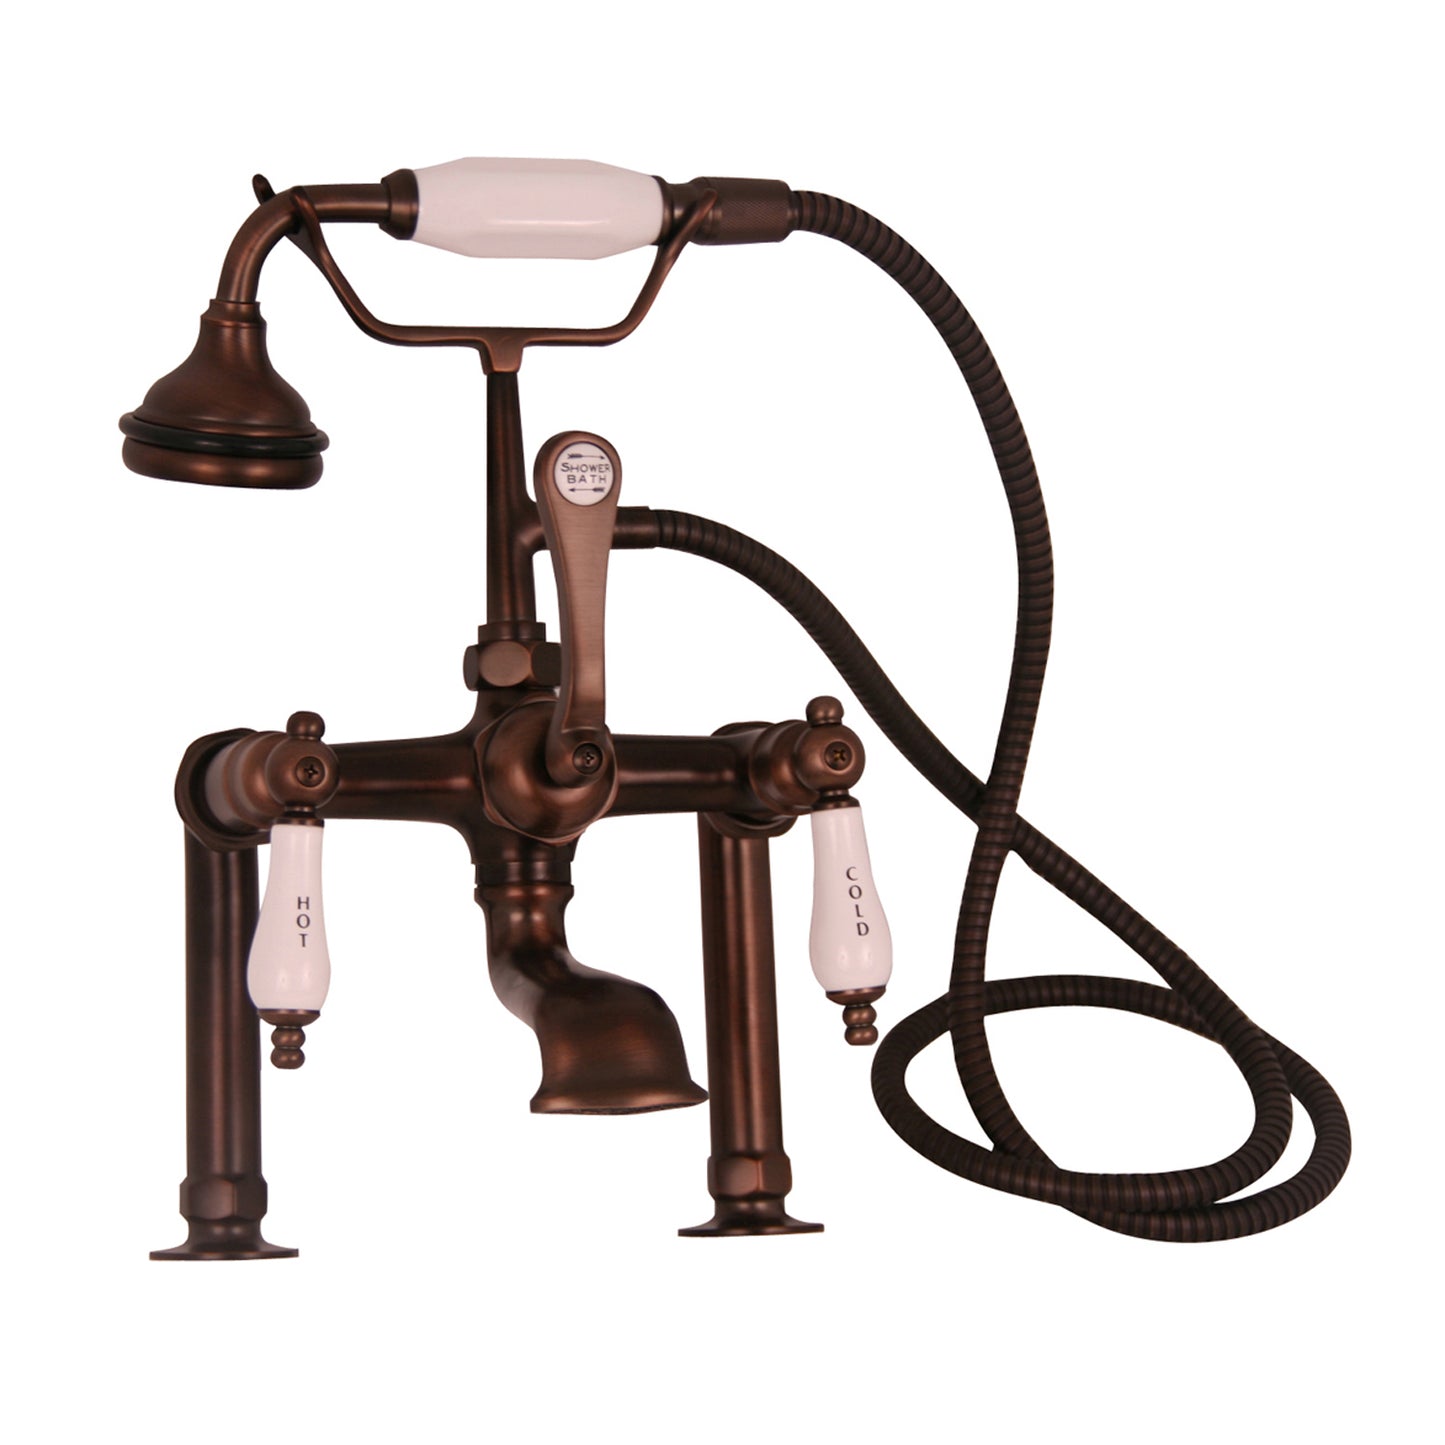 Tub Deck Diverter Faucet with Hand Shower & Lever Handles in Oil Rubbed Bronze